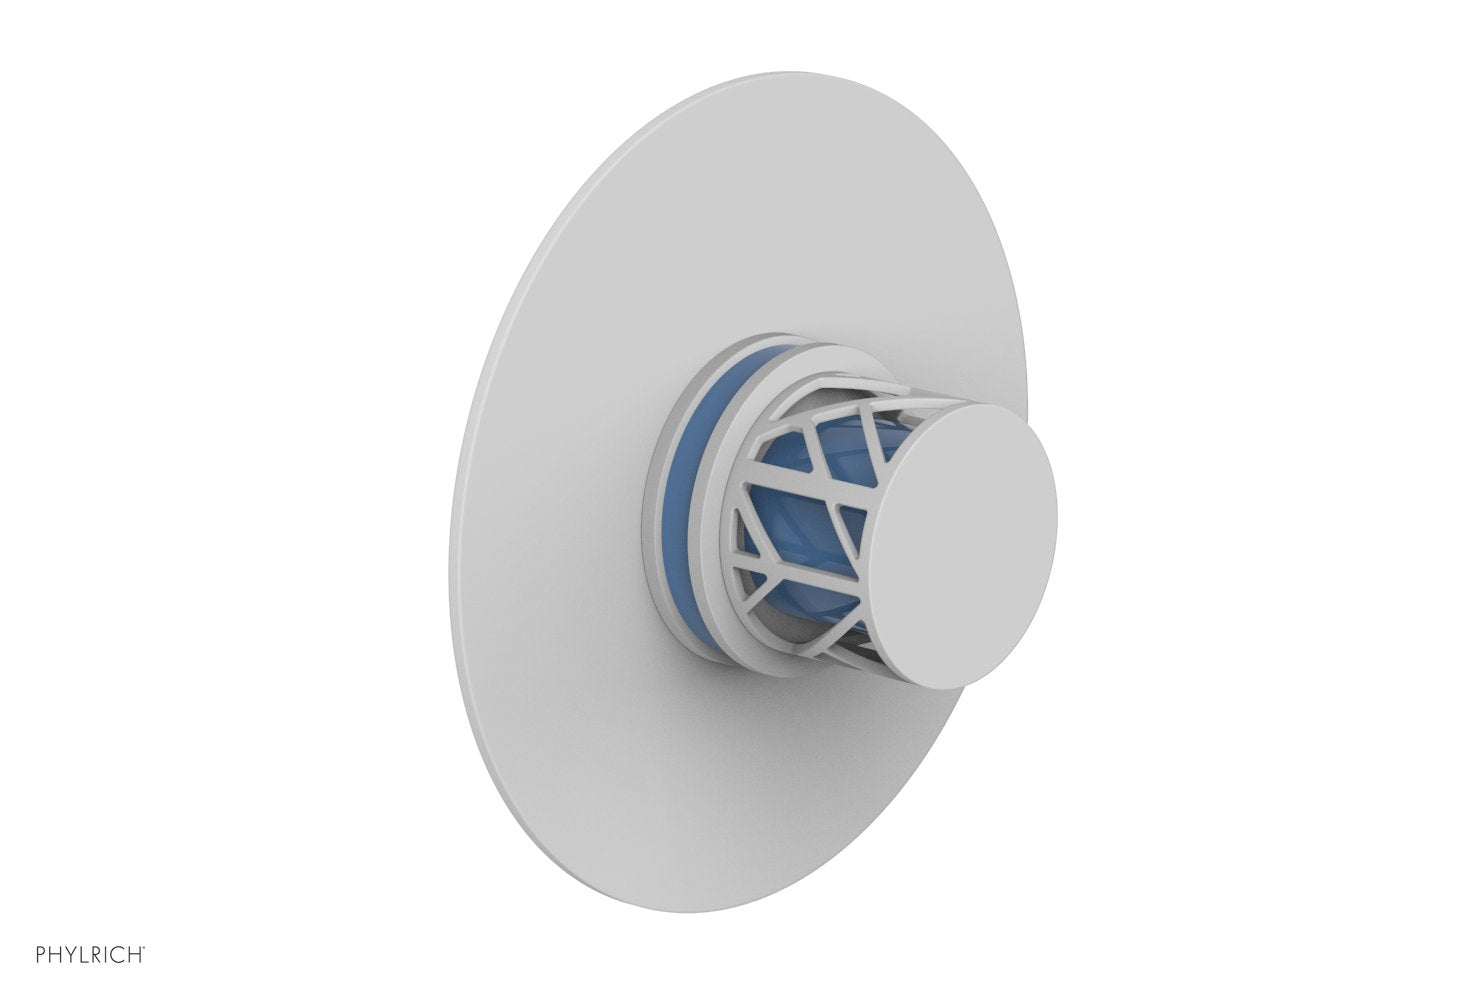 Phylrich JOLIE Thermostatic Shower Trim, Round Handle with "Light Blue" Accents